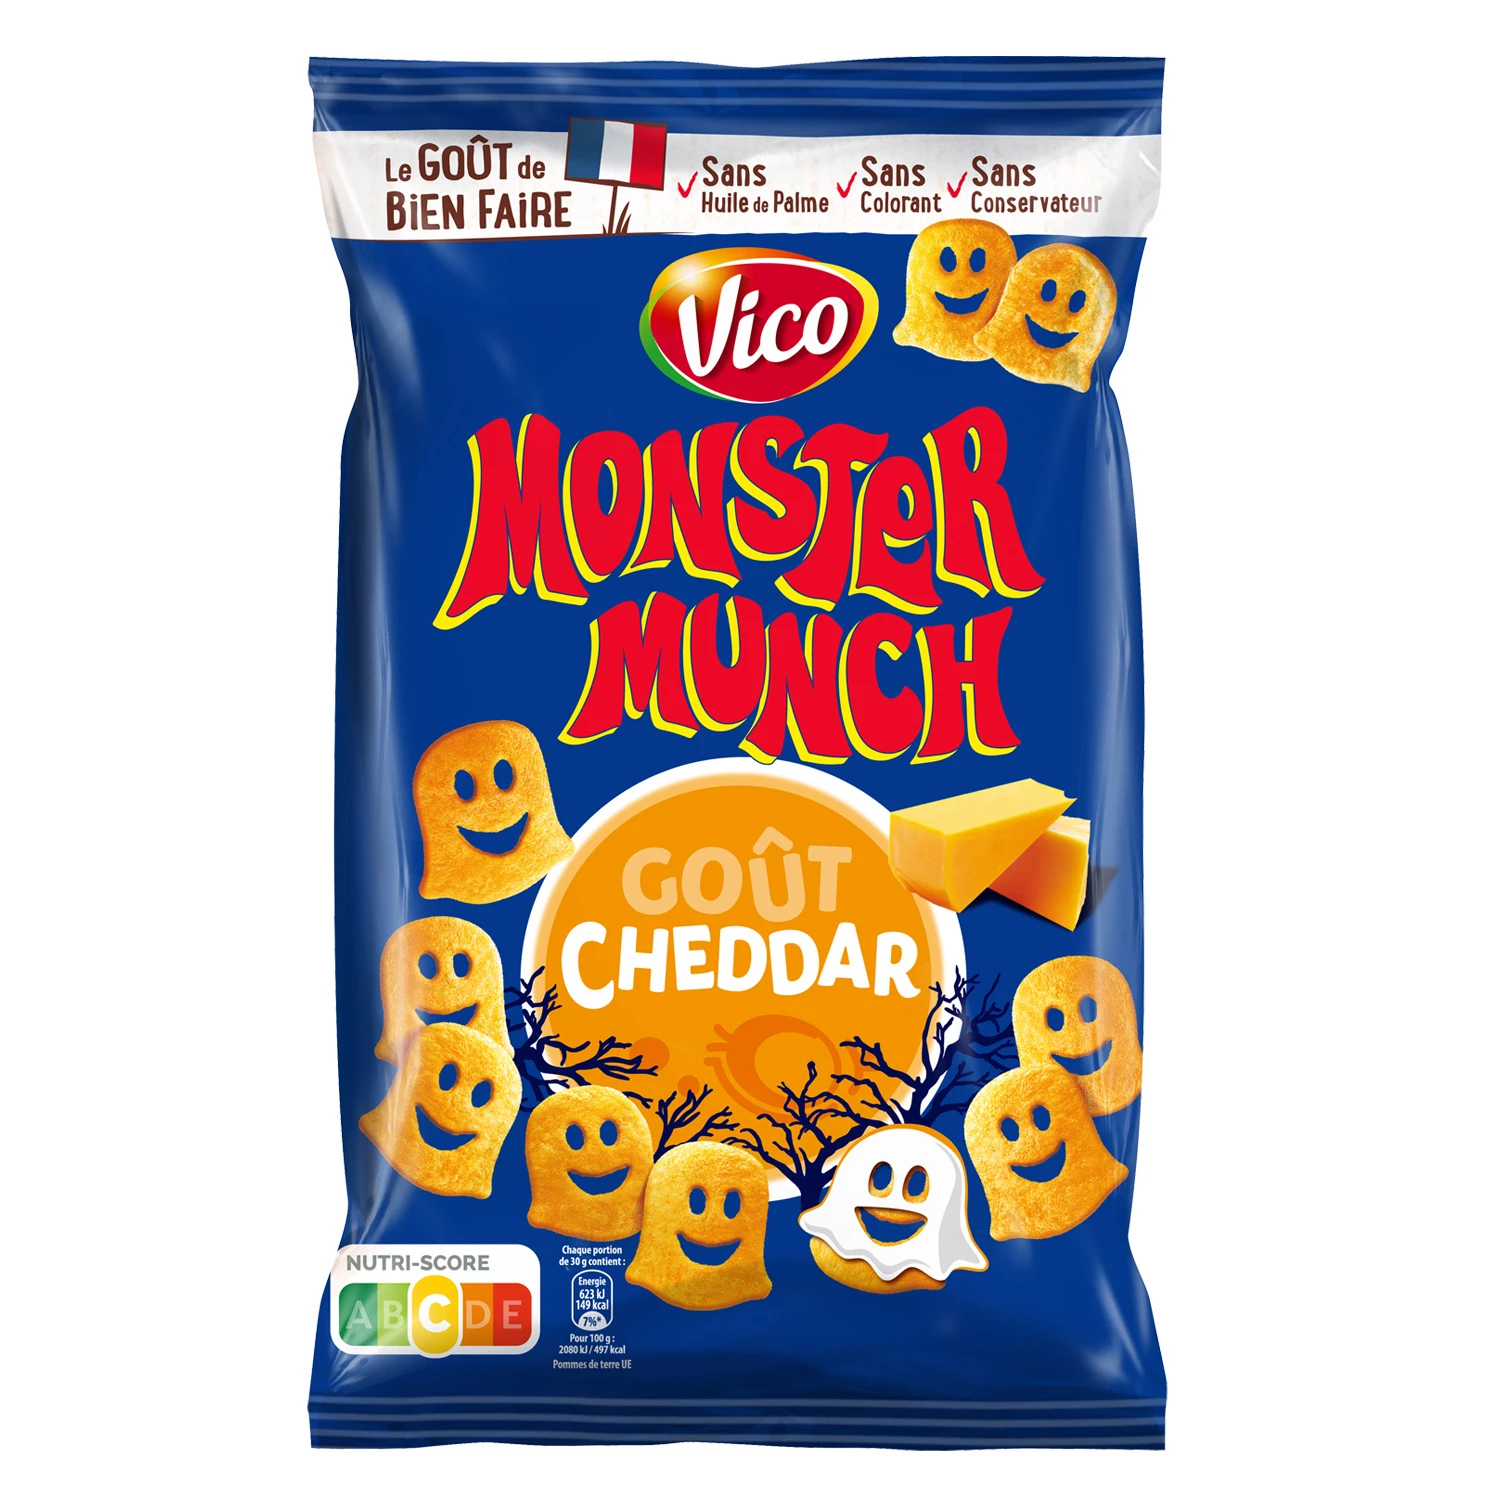 MONSTER MUNCH CRAZY Salted Cheddar Biscuit, 85g - VICO